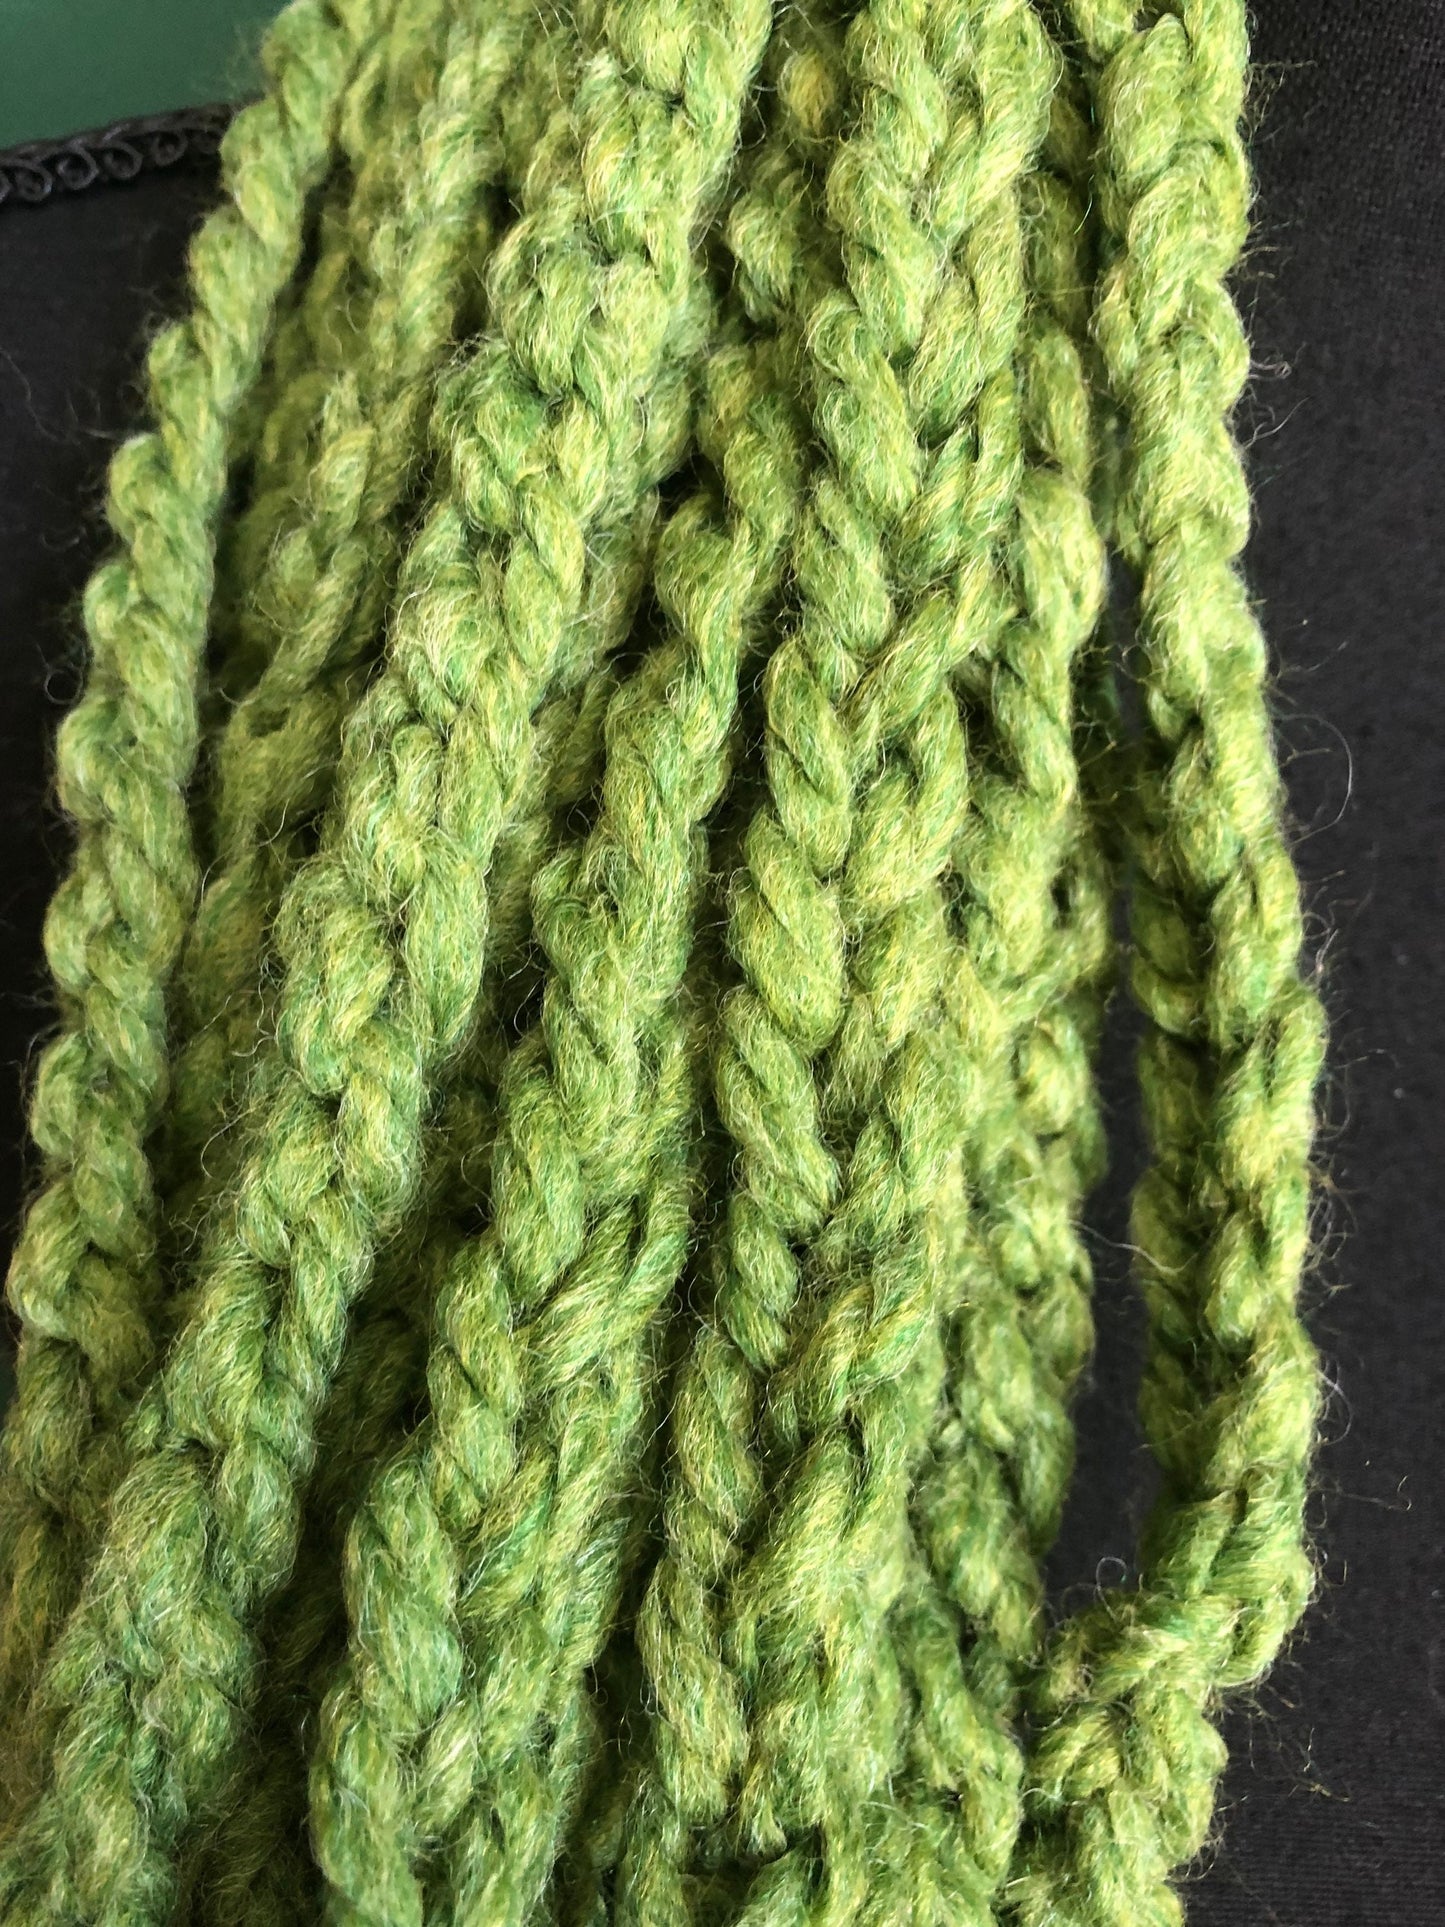 Green Women’s Scarf. Braided Chain Accent Scarf. Knitted scarf.